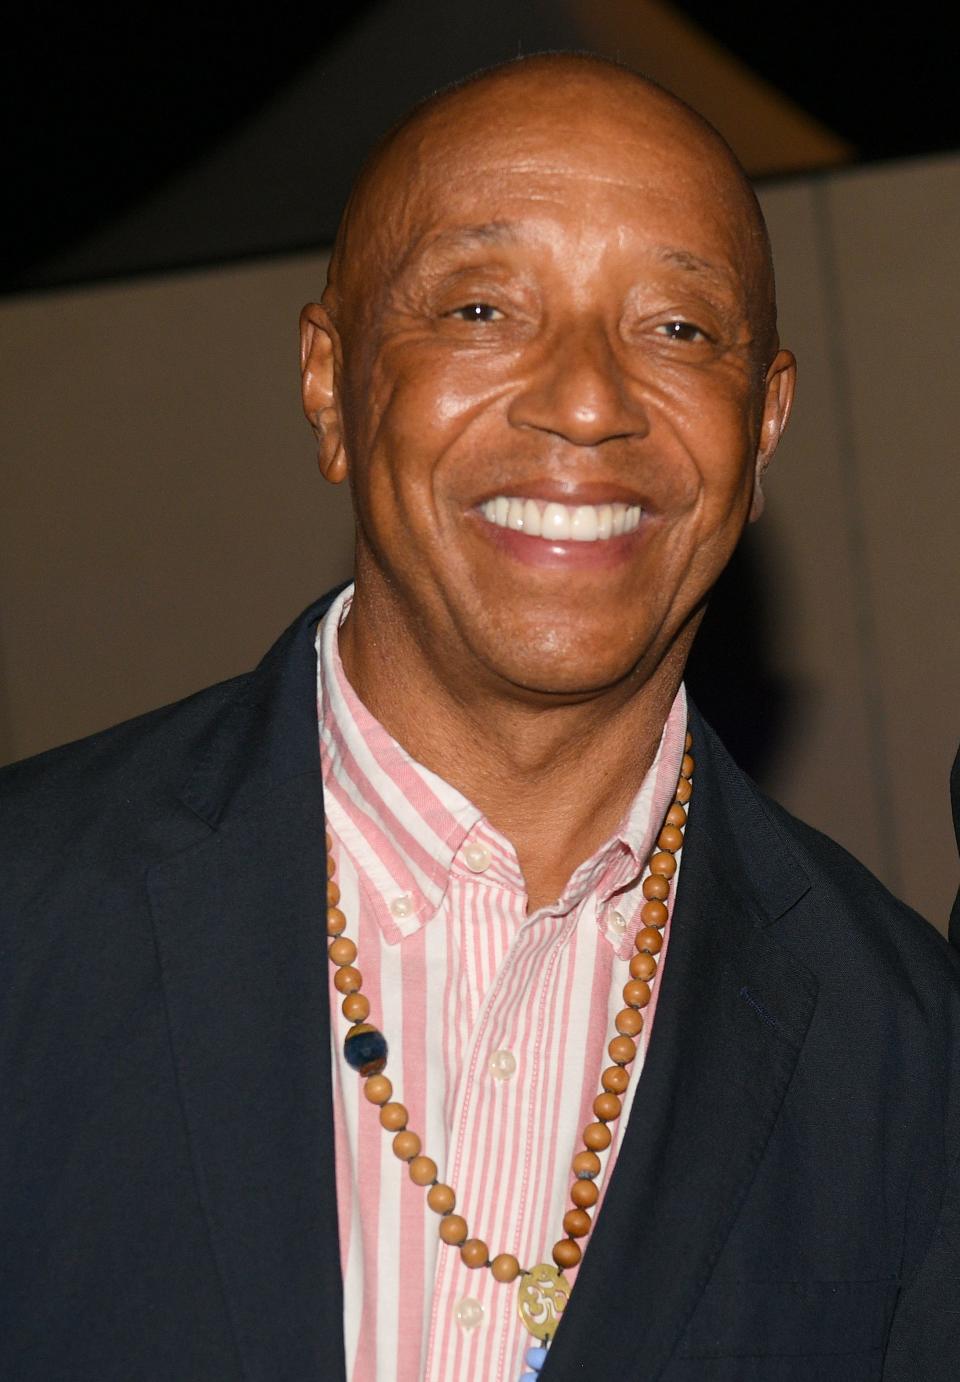 Is Russell Simmons Still Living Large? The HipHop Mogul’s Net Worth